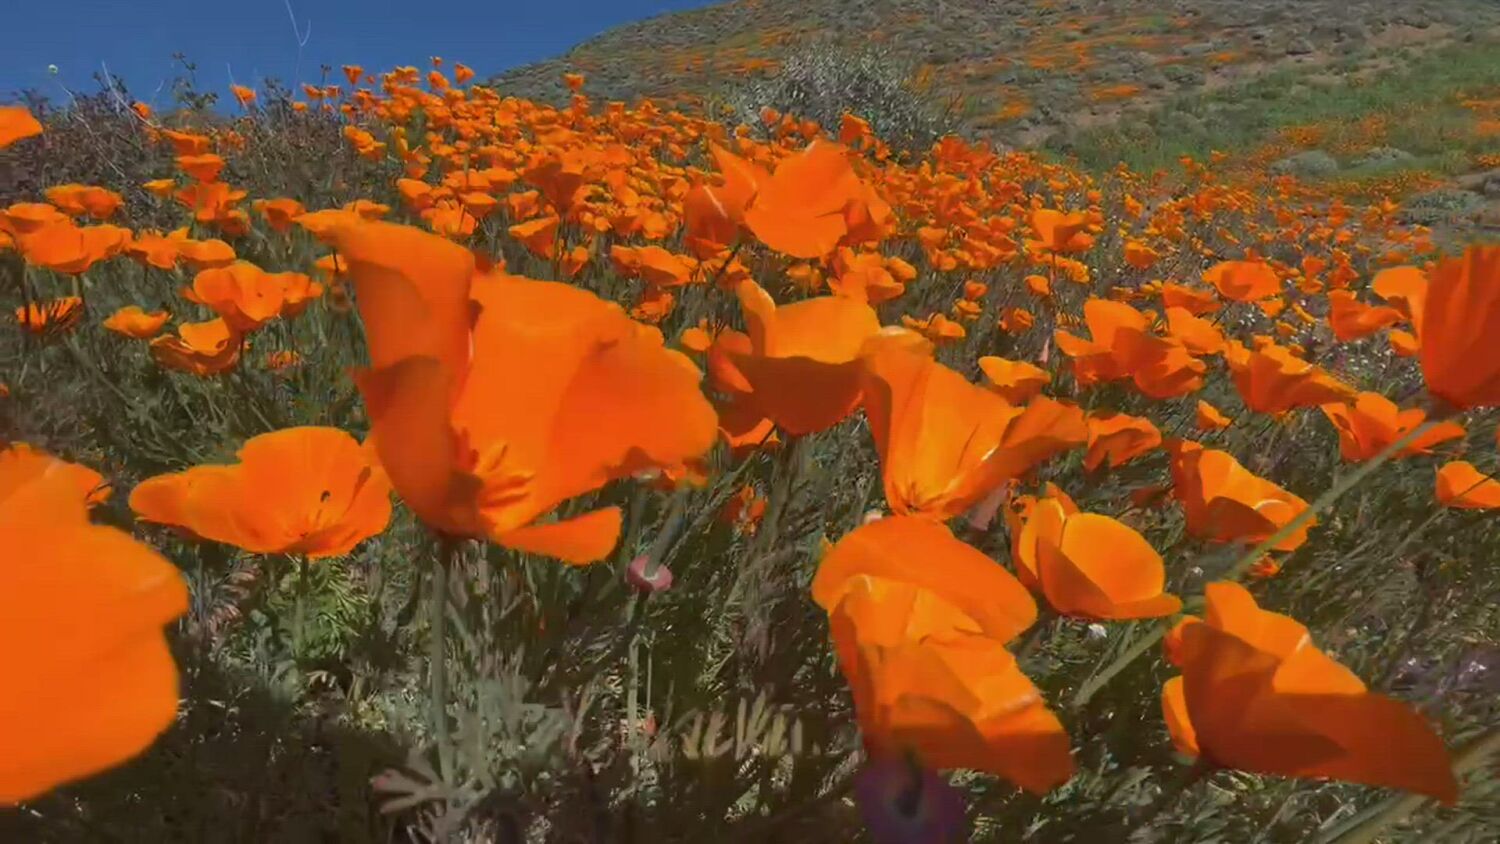 Photos: Don't come. You could be arrested | Lake Elsinore closes access to latest poppy 'superbloom'